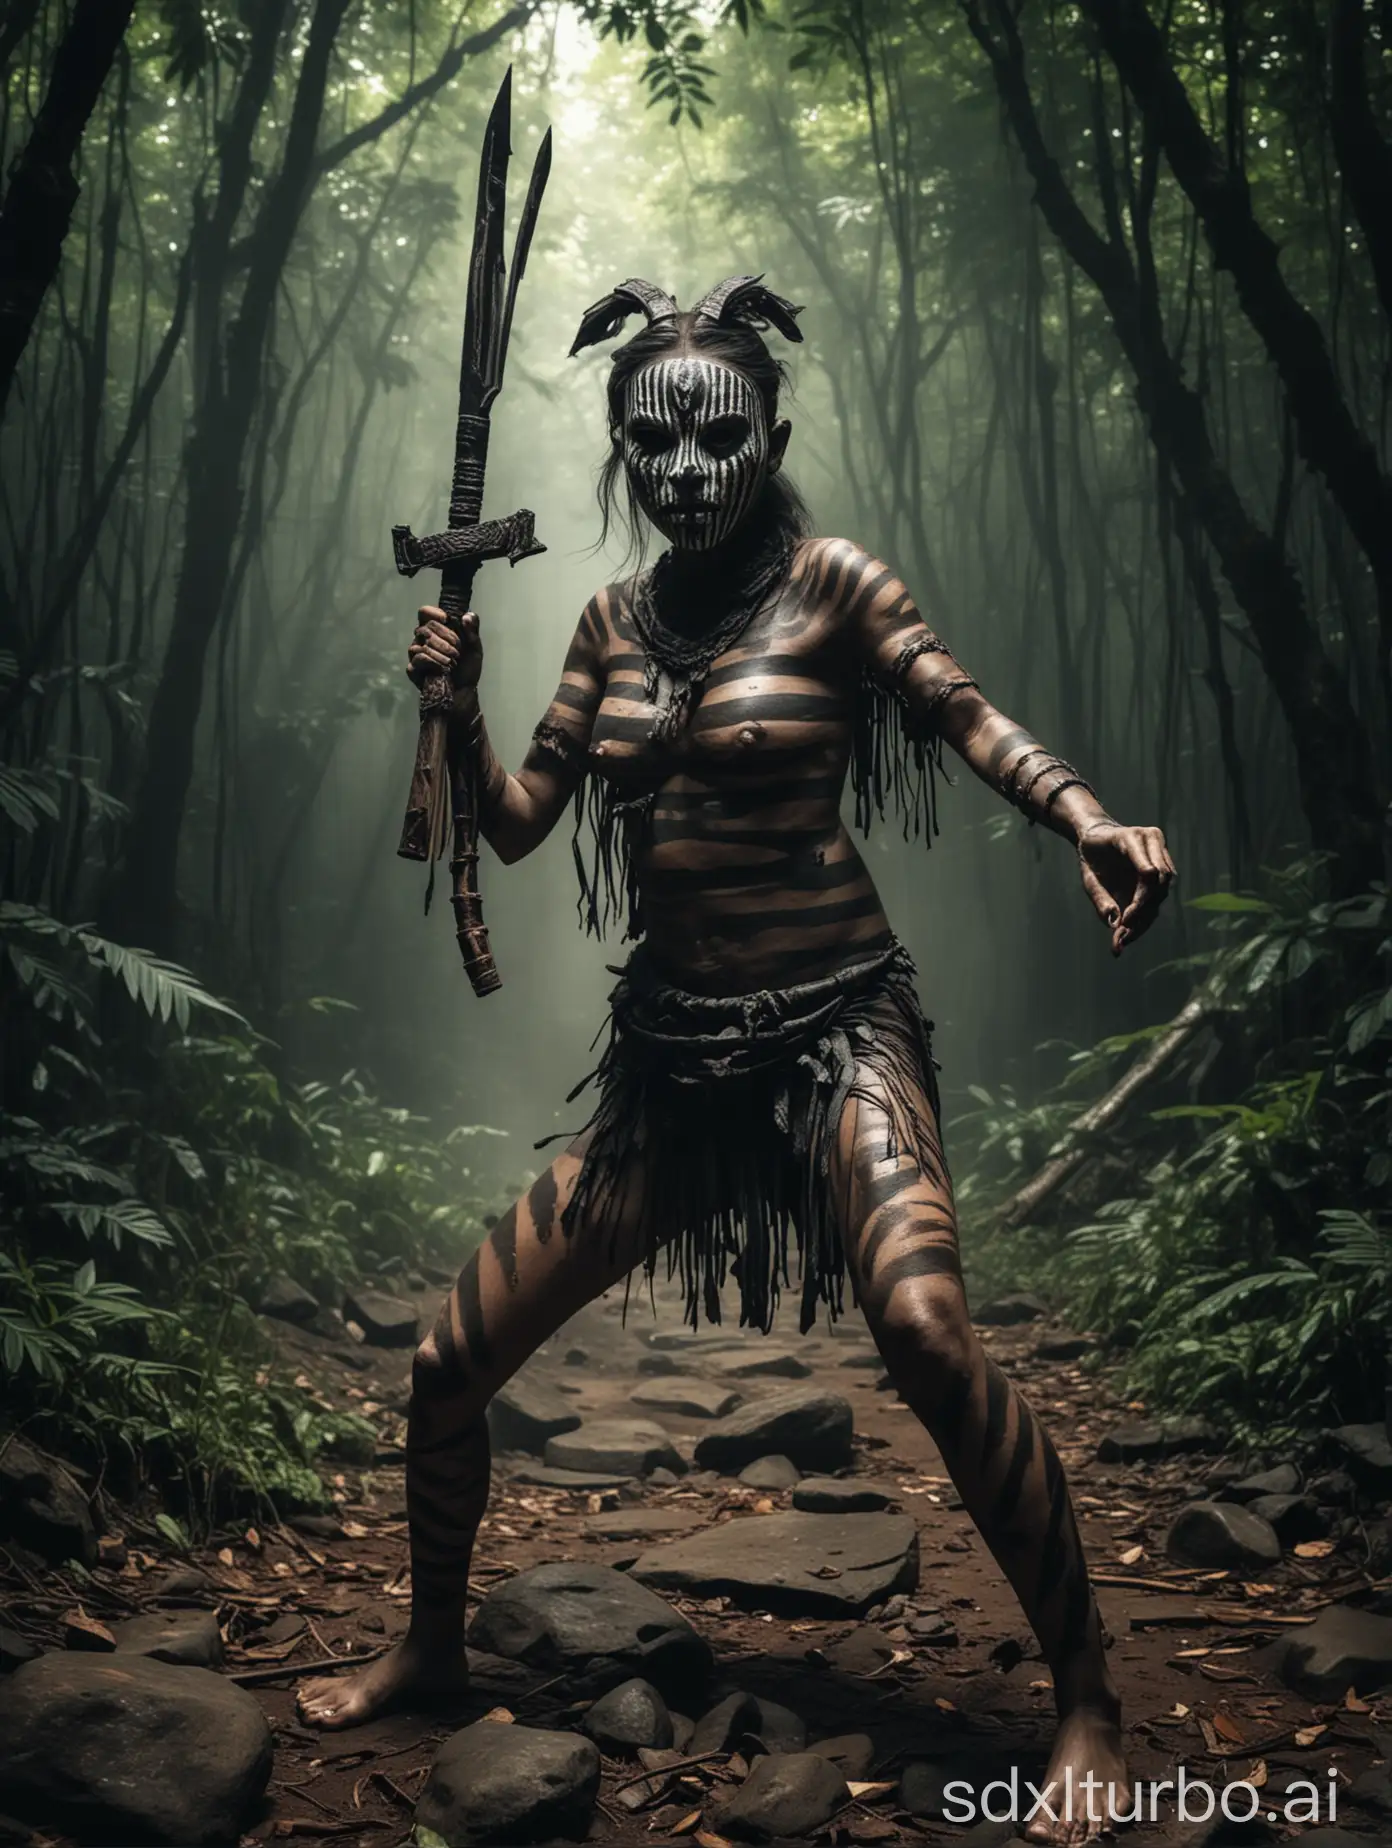 terrifying tribe woman wear Striped wooden mask, dark bodypainting whole on body, fighting pose with (weapon) on the rock in middle shady jungle, dark ambience effect